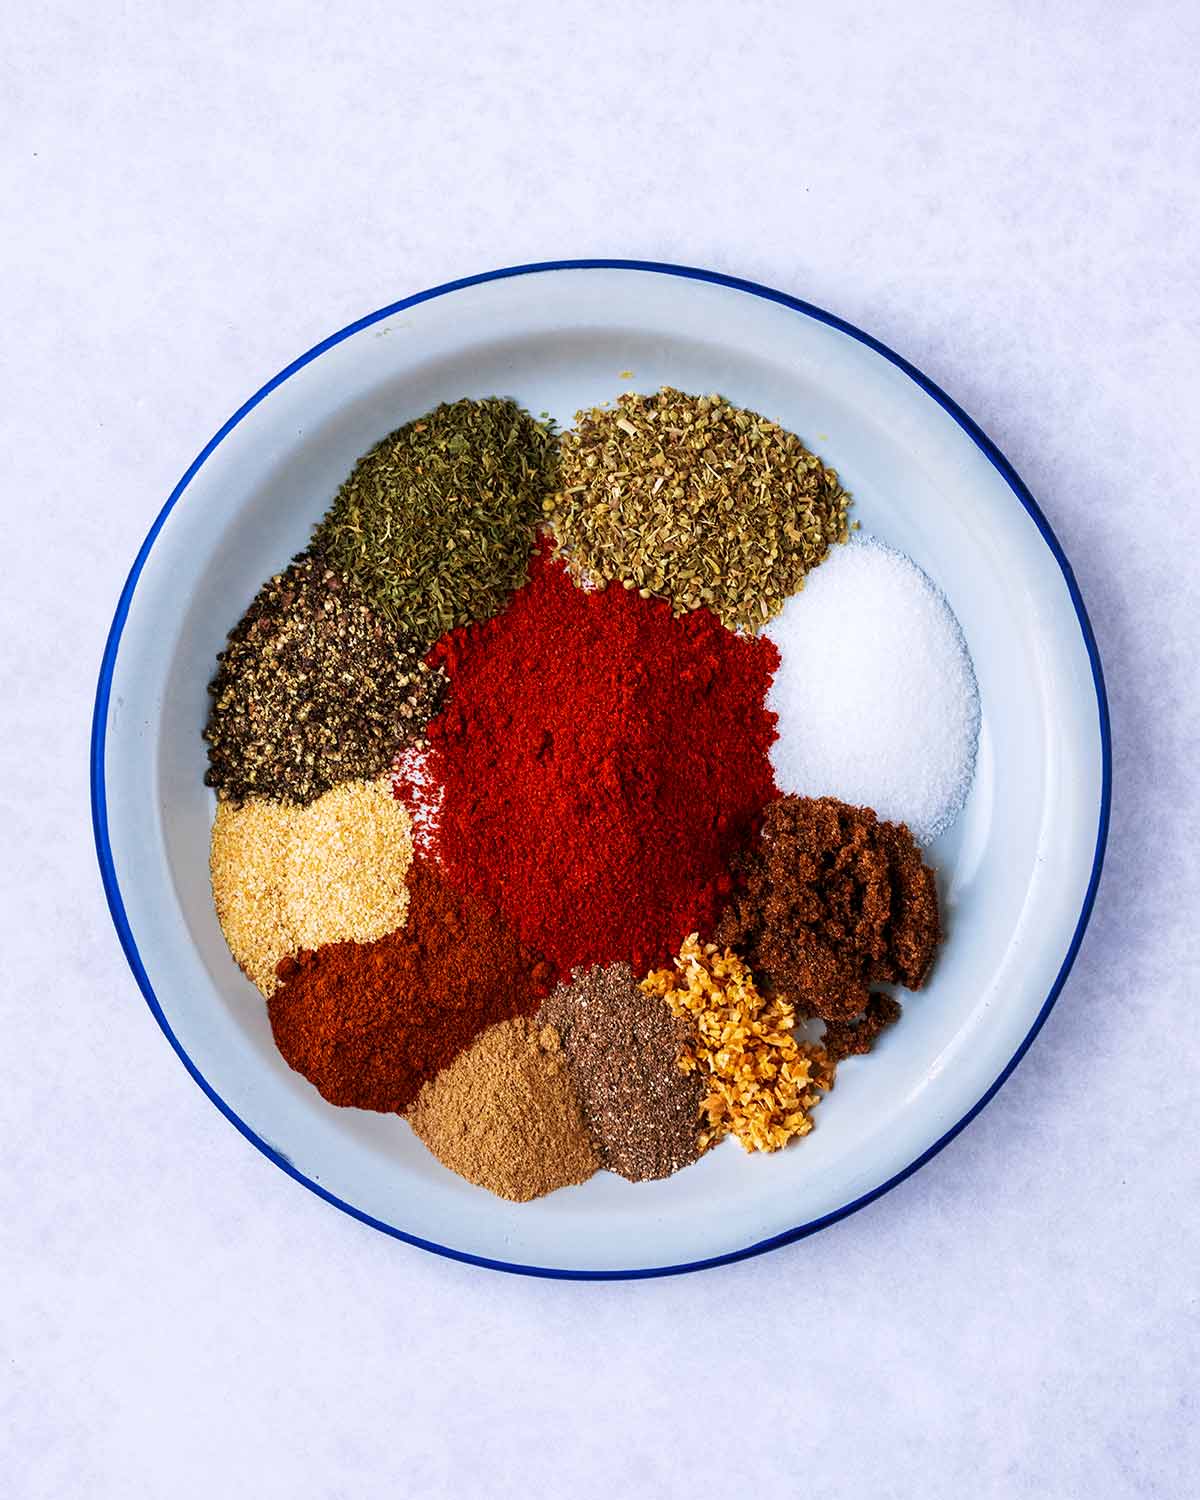 Eleven different herbs and spices on a plate.